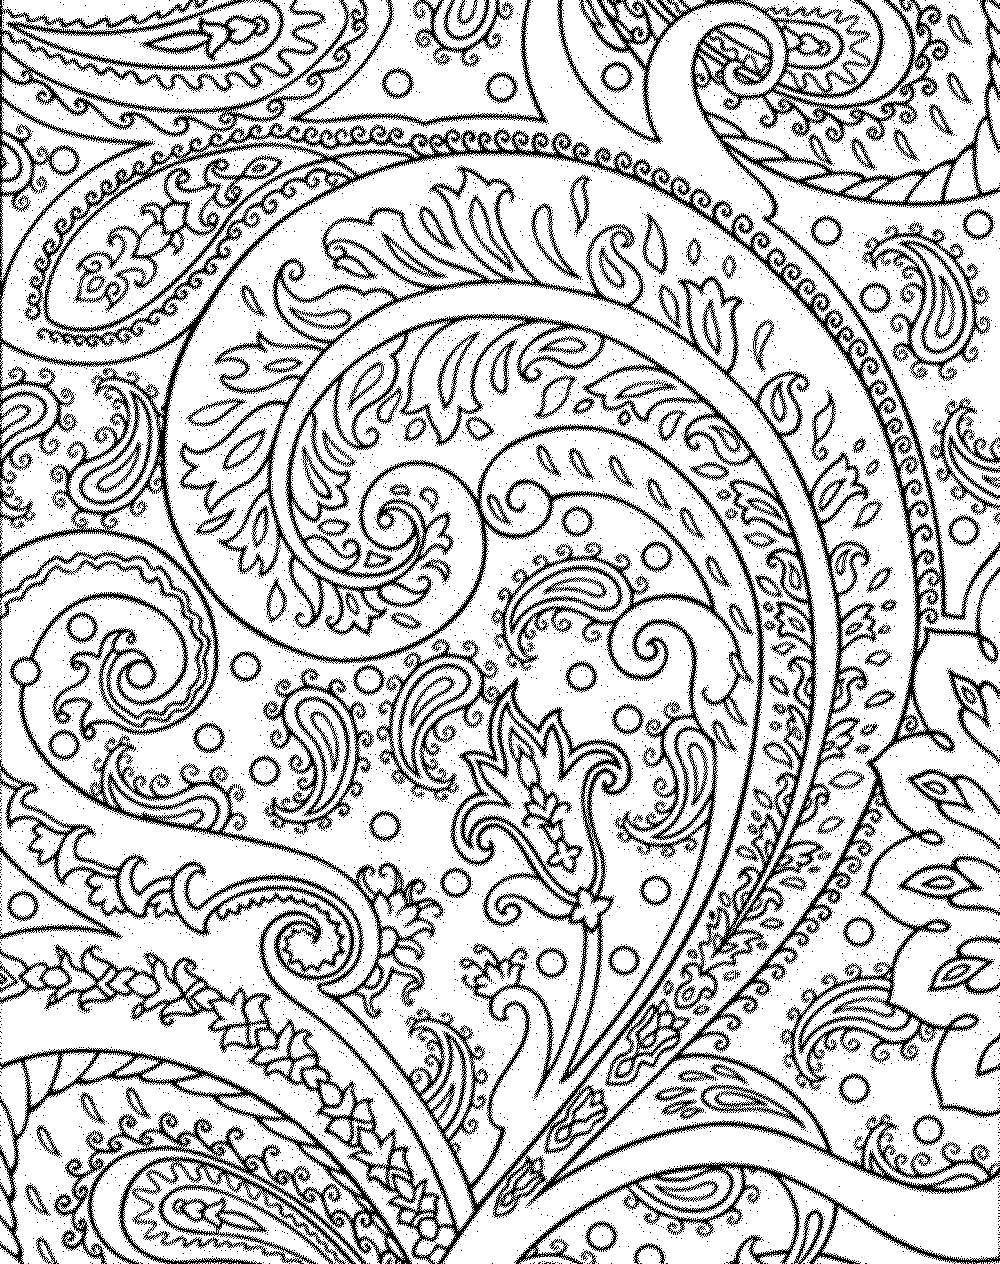 Free Intricate Coloring Pages Owl Coloring - VoteForVerde.com